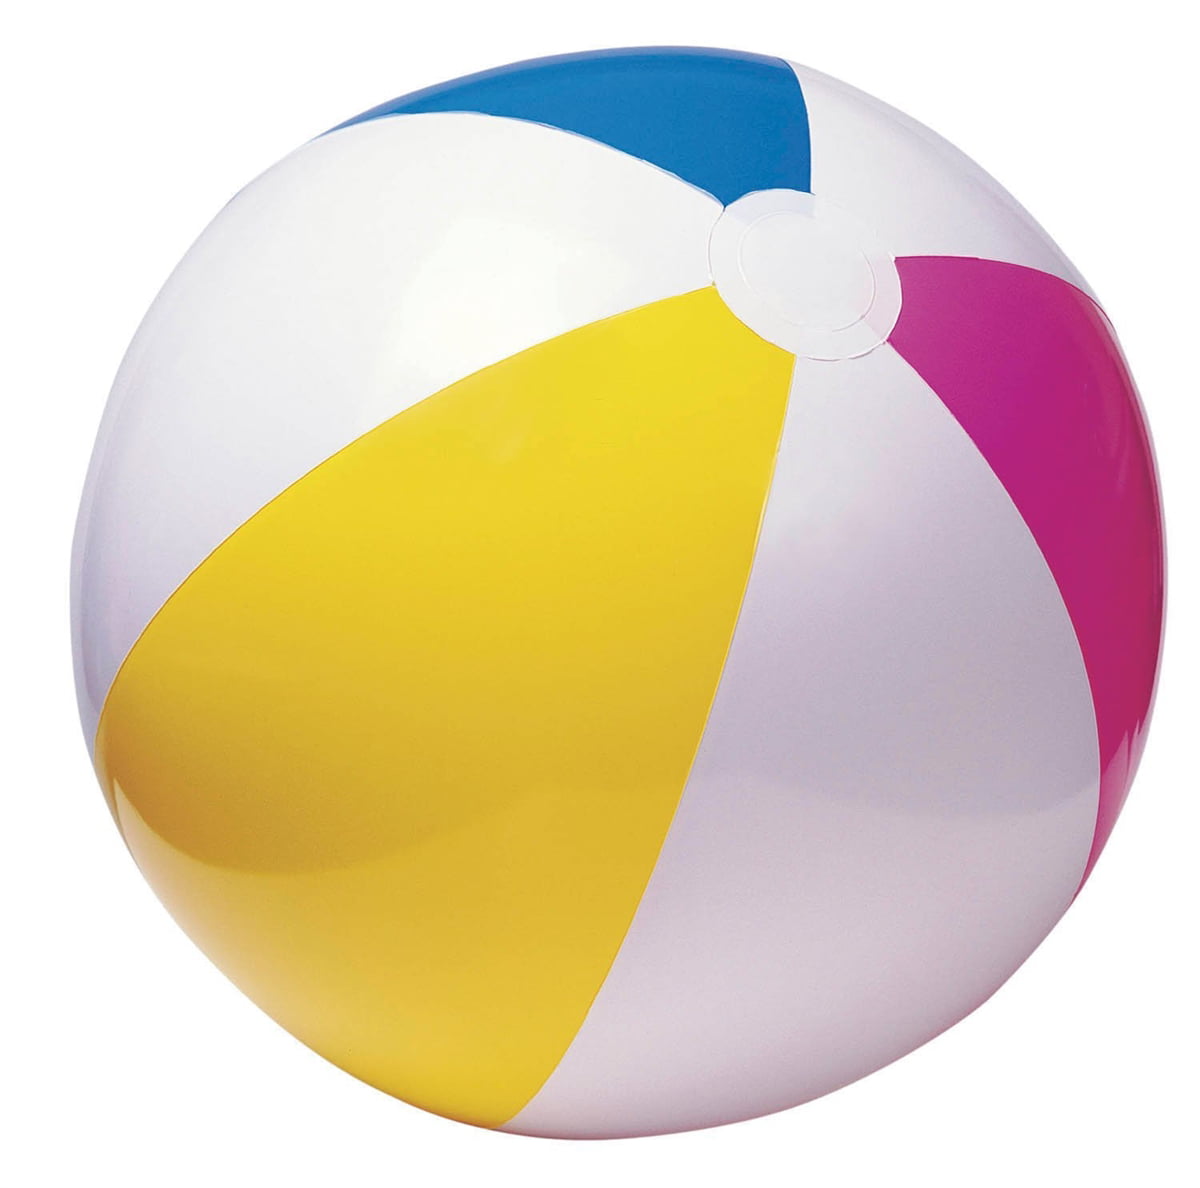 42" INTEX Large Giant Inflatable Jumbo Beach Ball Arm Bands Lively Print Ball 